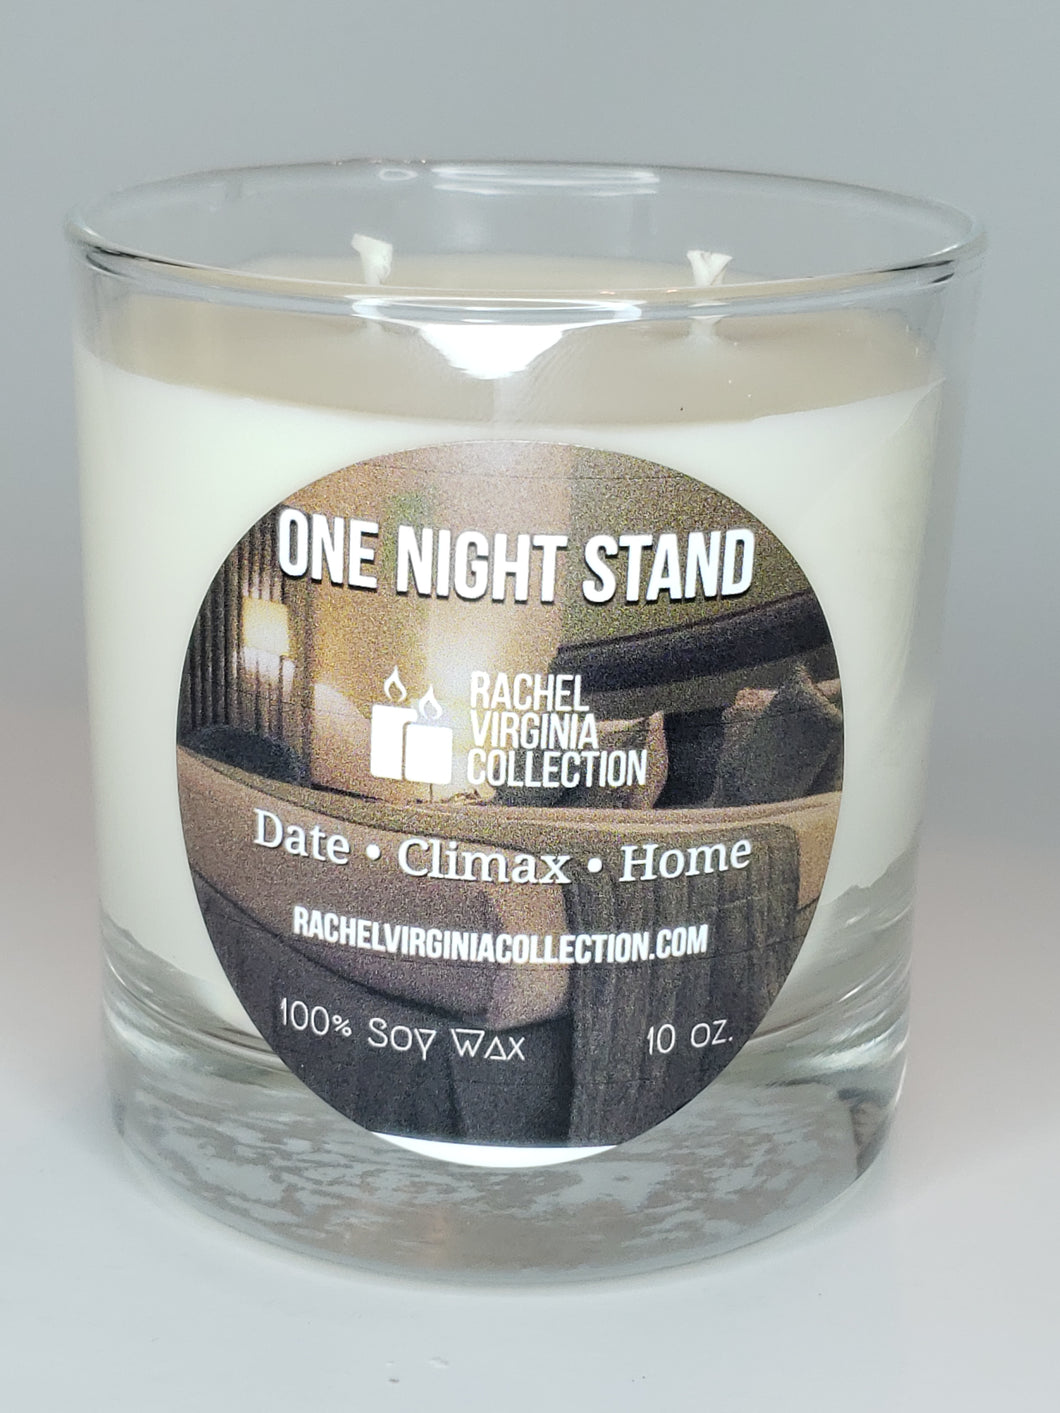 One Night Stand Candle 10 oz. - Rachel Virginia Collection 